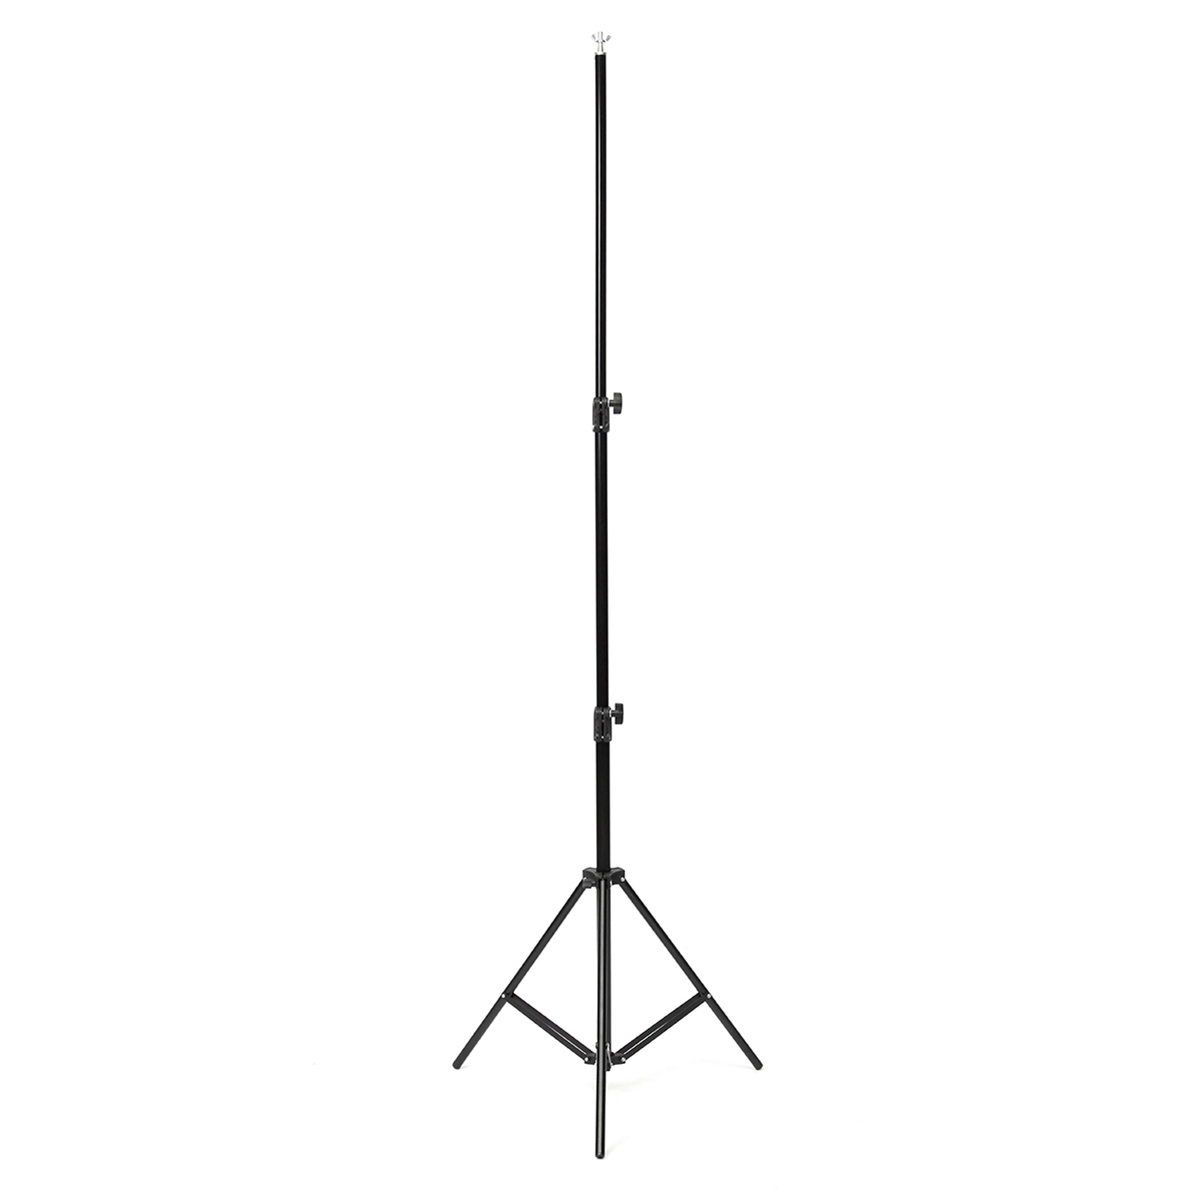 Collapsible-Background-Support-Stand-Kit-Adjustable-Crossbars-Photography-Holder-1130335